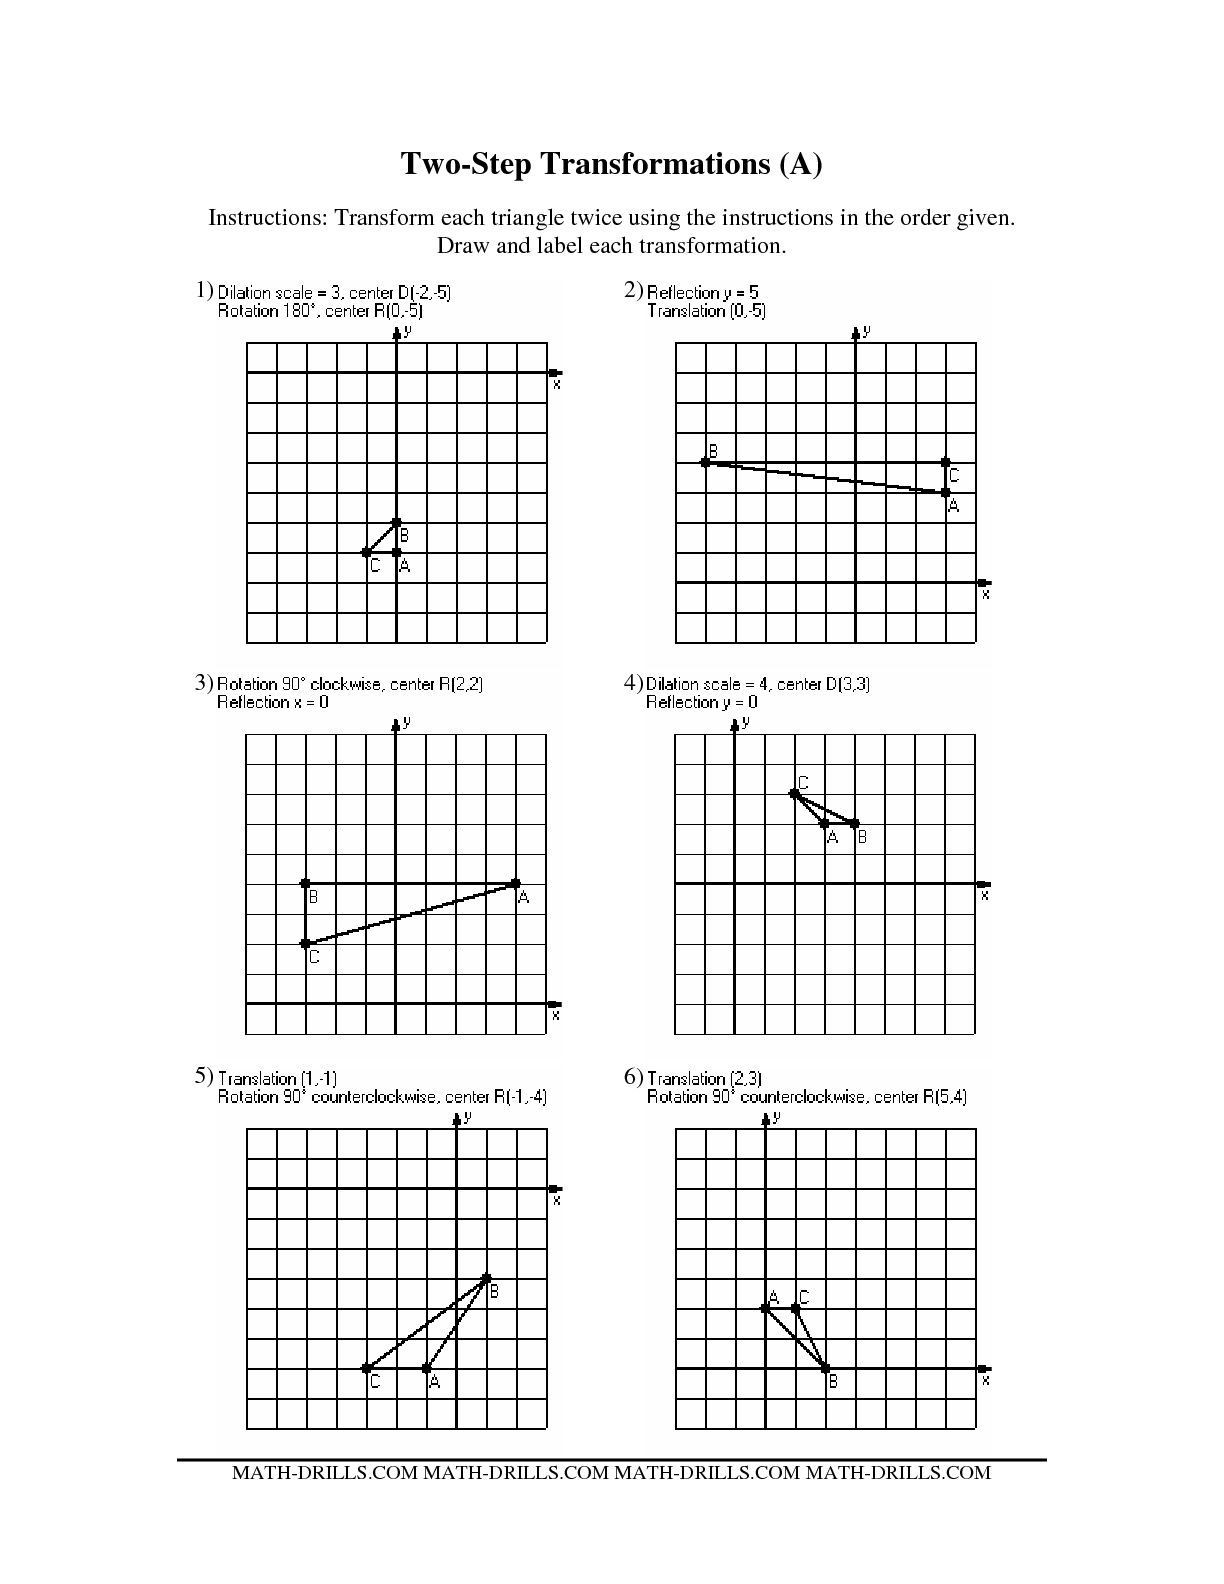 Geometry Transformations Worksheet Pdf the Two Step Transformations Old Version All Math